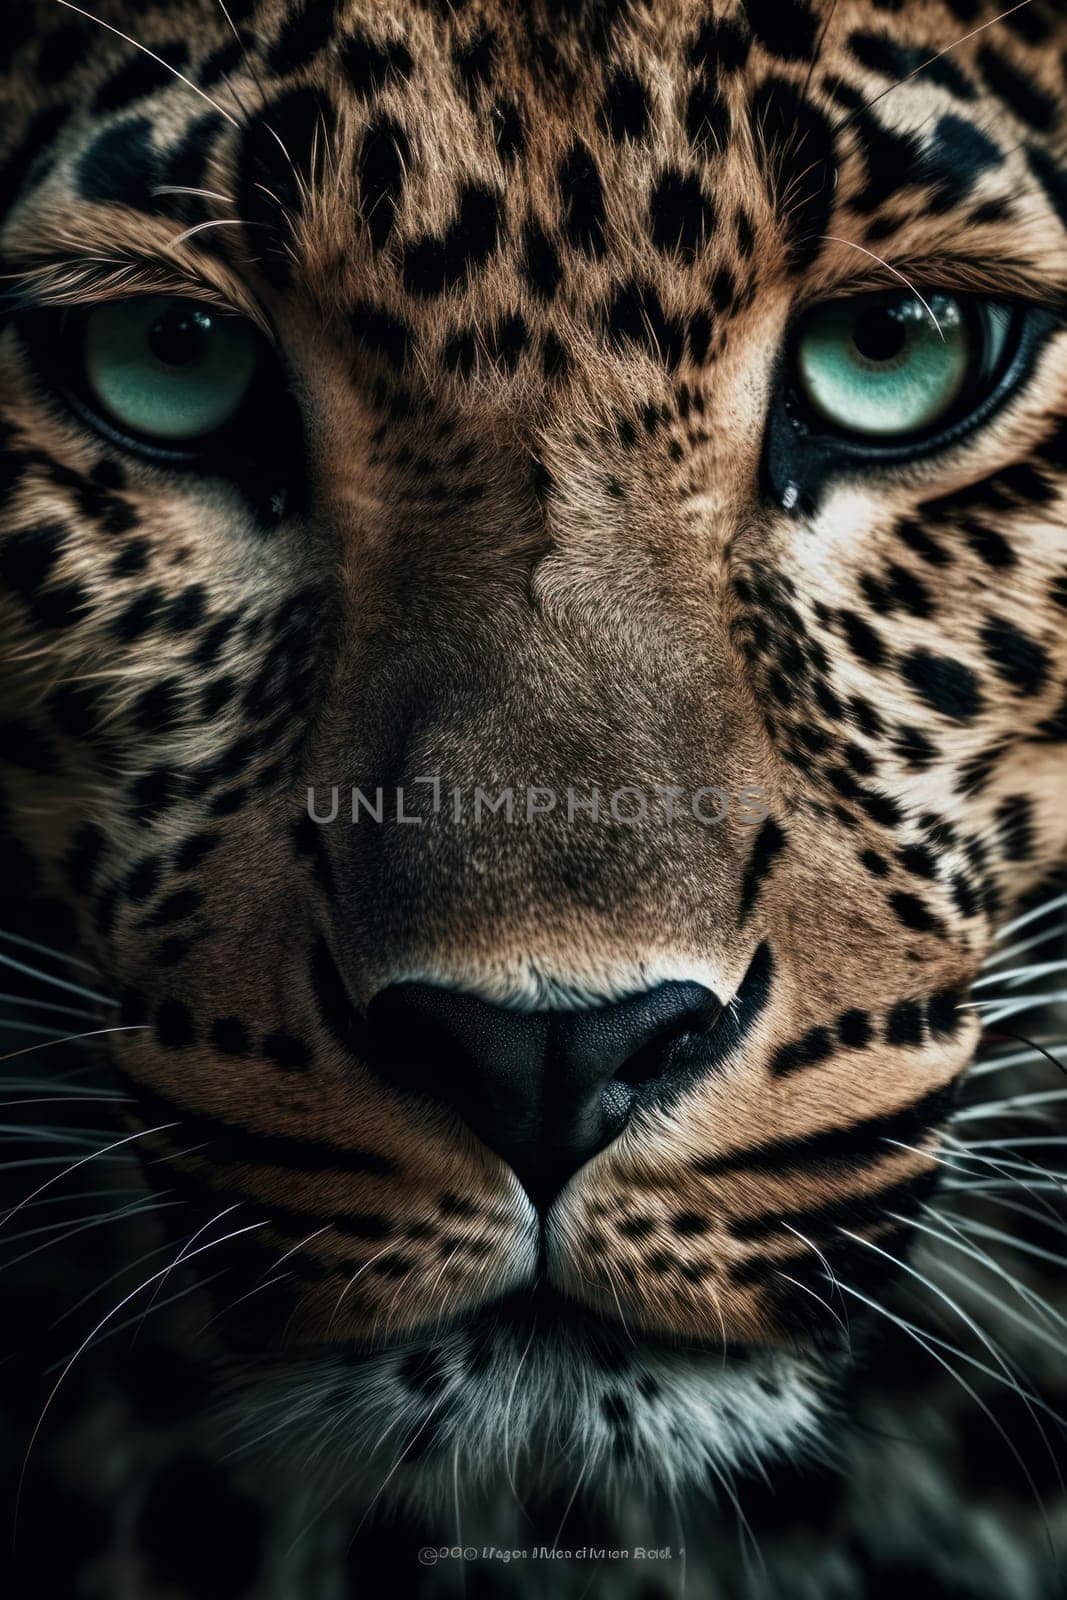 A stunning close-up shot of a leopard's face with captivating blue eyes by Sorapop